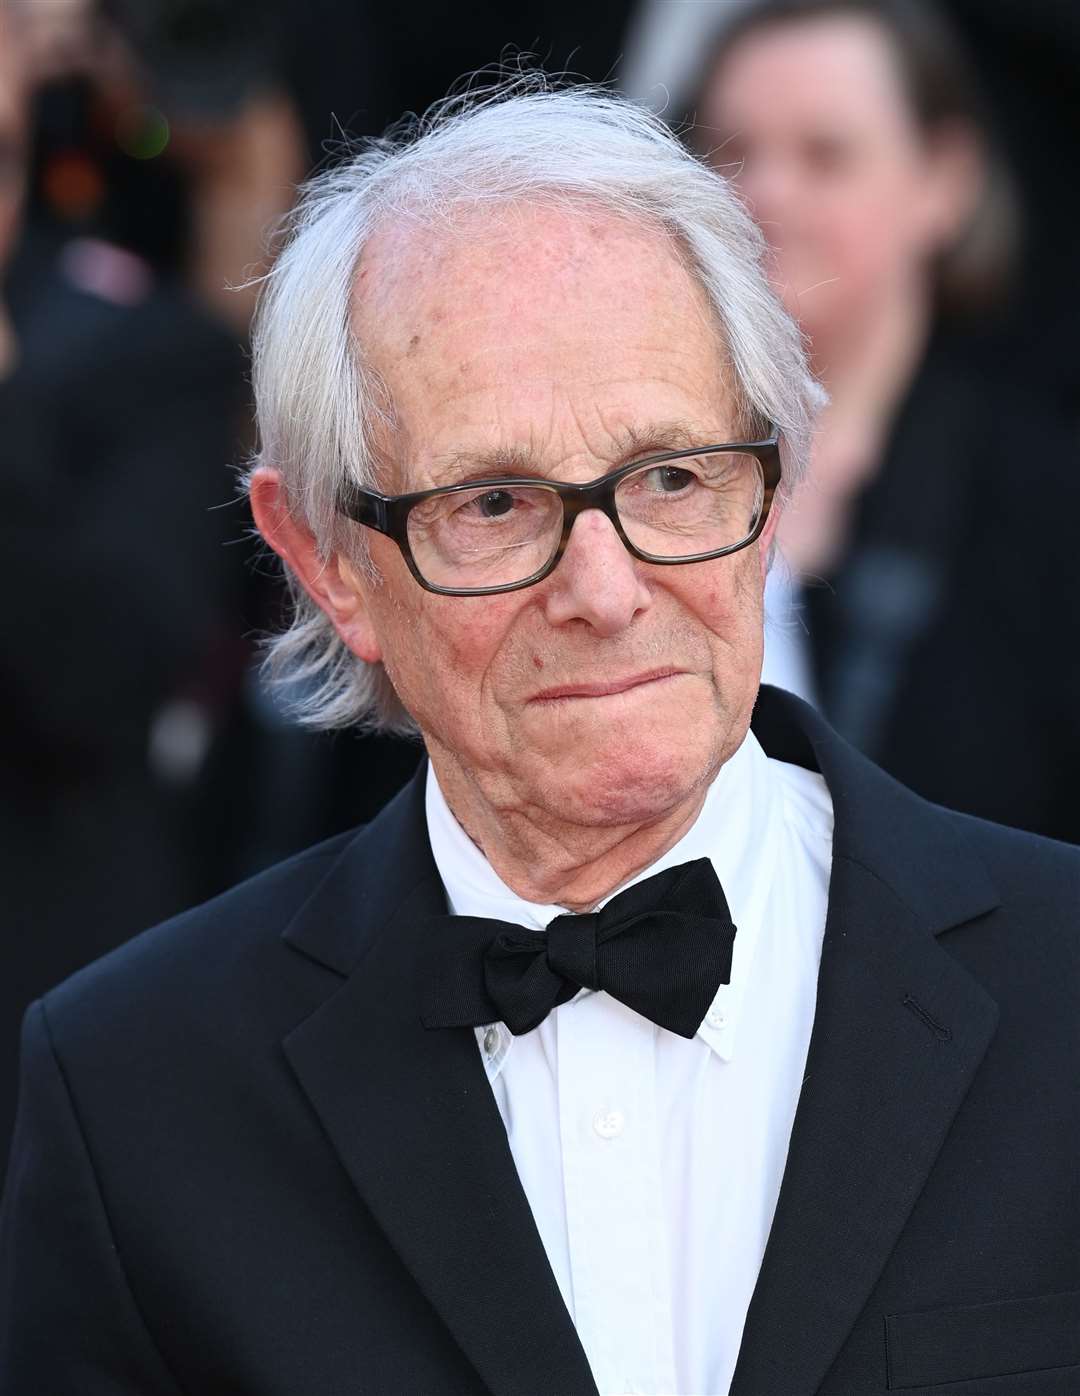 Film director Ken Loach was expelled from the Labour Party amid efforts to tackle the antisemitism experienced during Jeremy Corbyn’s leadership (Doug Peters/PA)